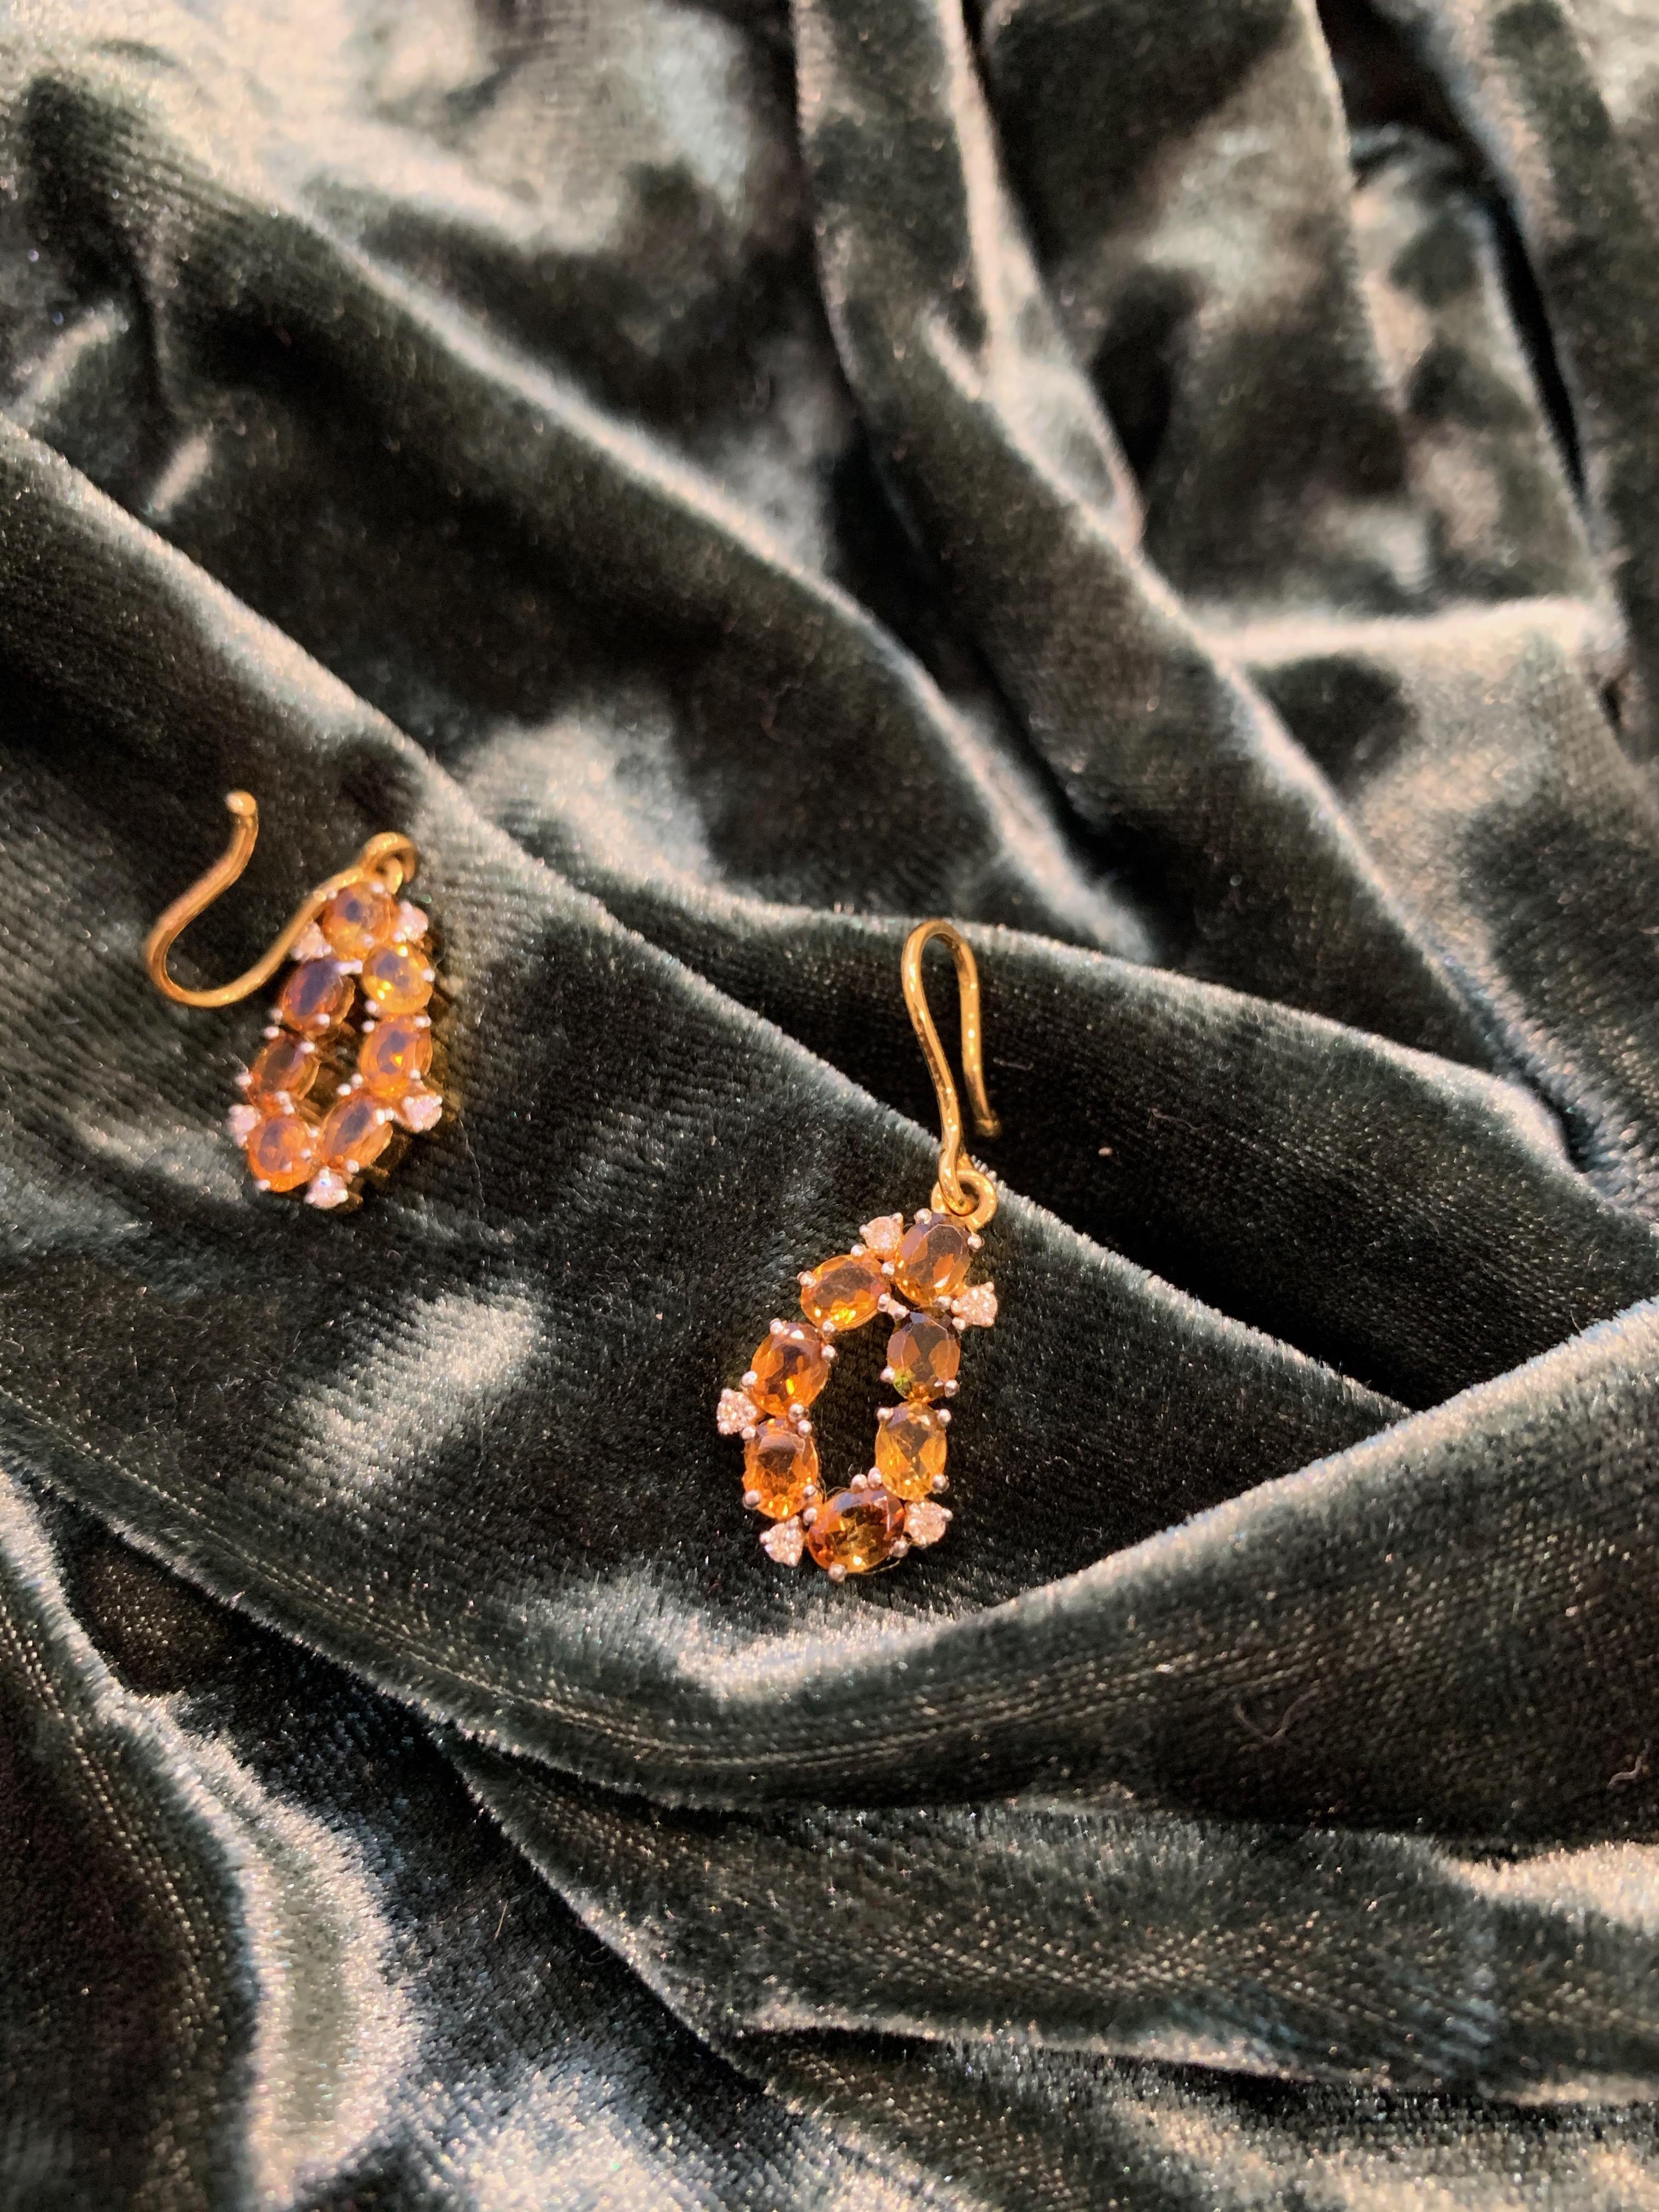 These impeccable earrings with alluring pattern of dazzling diamonds & tourmalines are sure to bedazzle you.
Most of our jewels are made to order, so please allow us for a 2-4 week delivery.
Please note the possibility of natural inclusions in